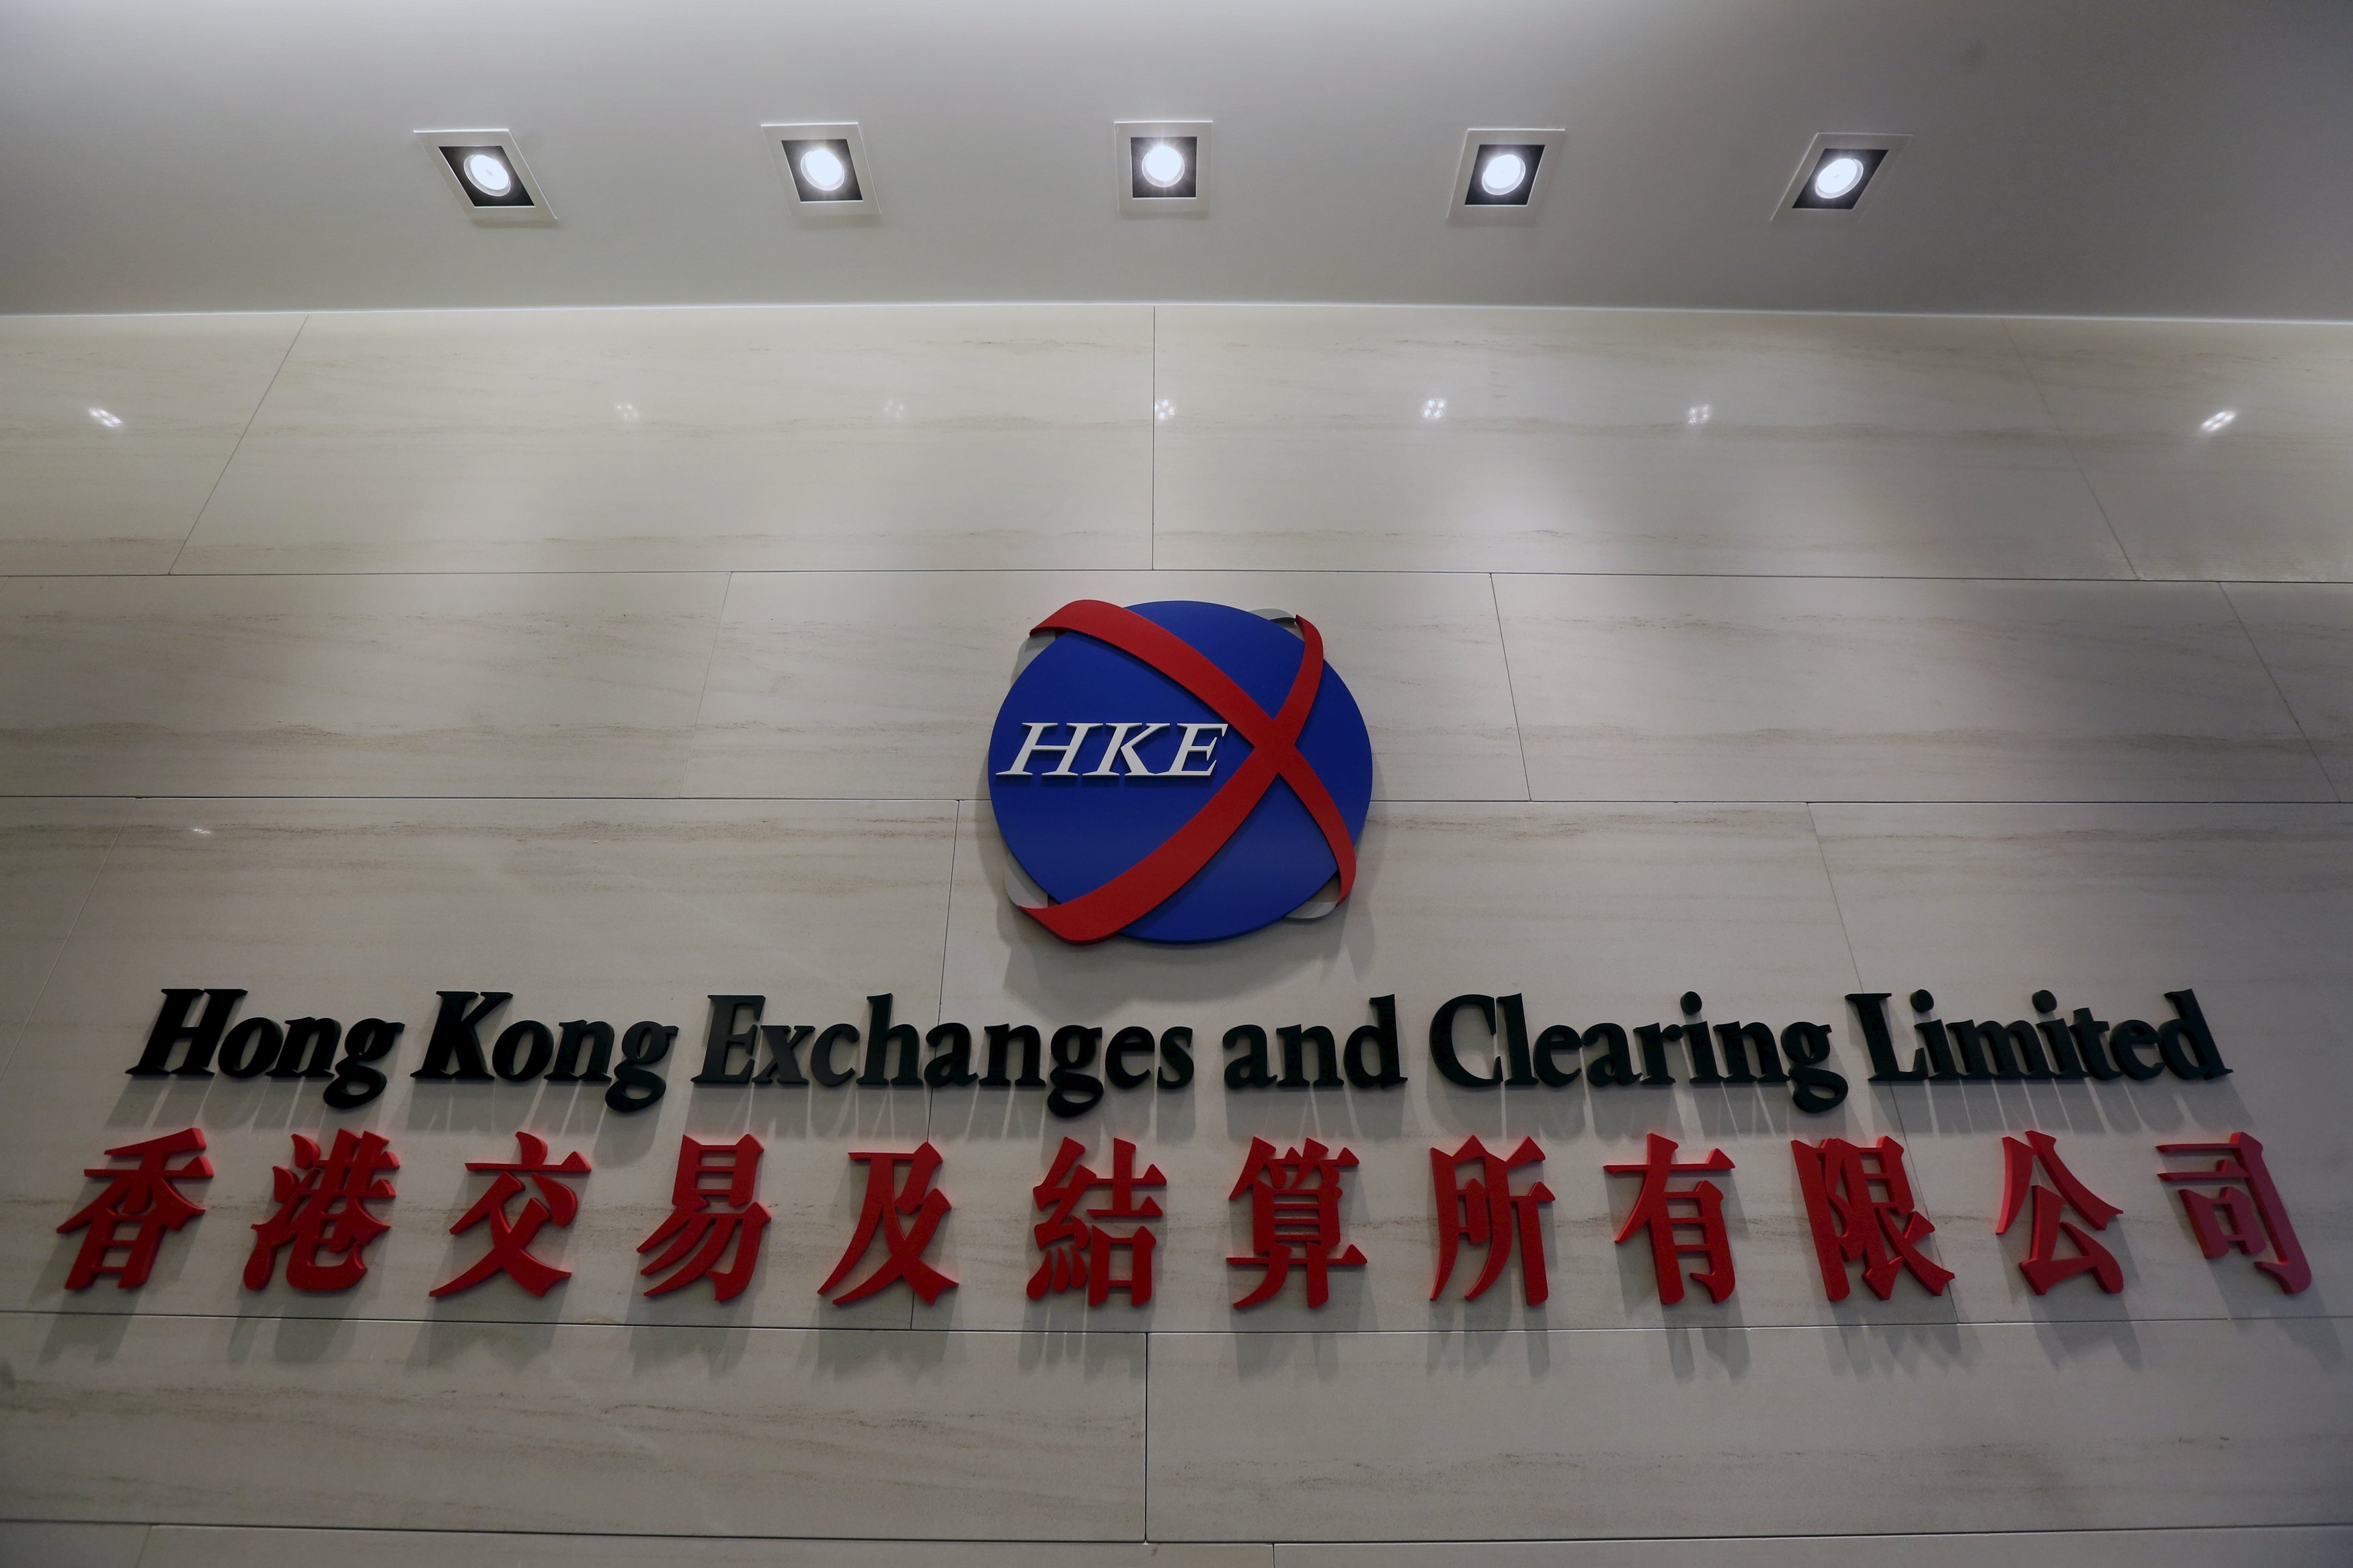 The company logo of Hong Kong Exchanges and Clearing Limited is displayed at its office in Hong Kong, China November 17, 2015. China's regulators may have overreacted with proposed new trading curbs to stamp out speculative behaviour but the Hong Kong stock exchange remains hopeful that onshore markets will eventually rise to international standards, its chief executive told Reuters on November 17. November 17, 2015. REUTERS/Bobby Yip